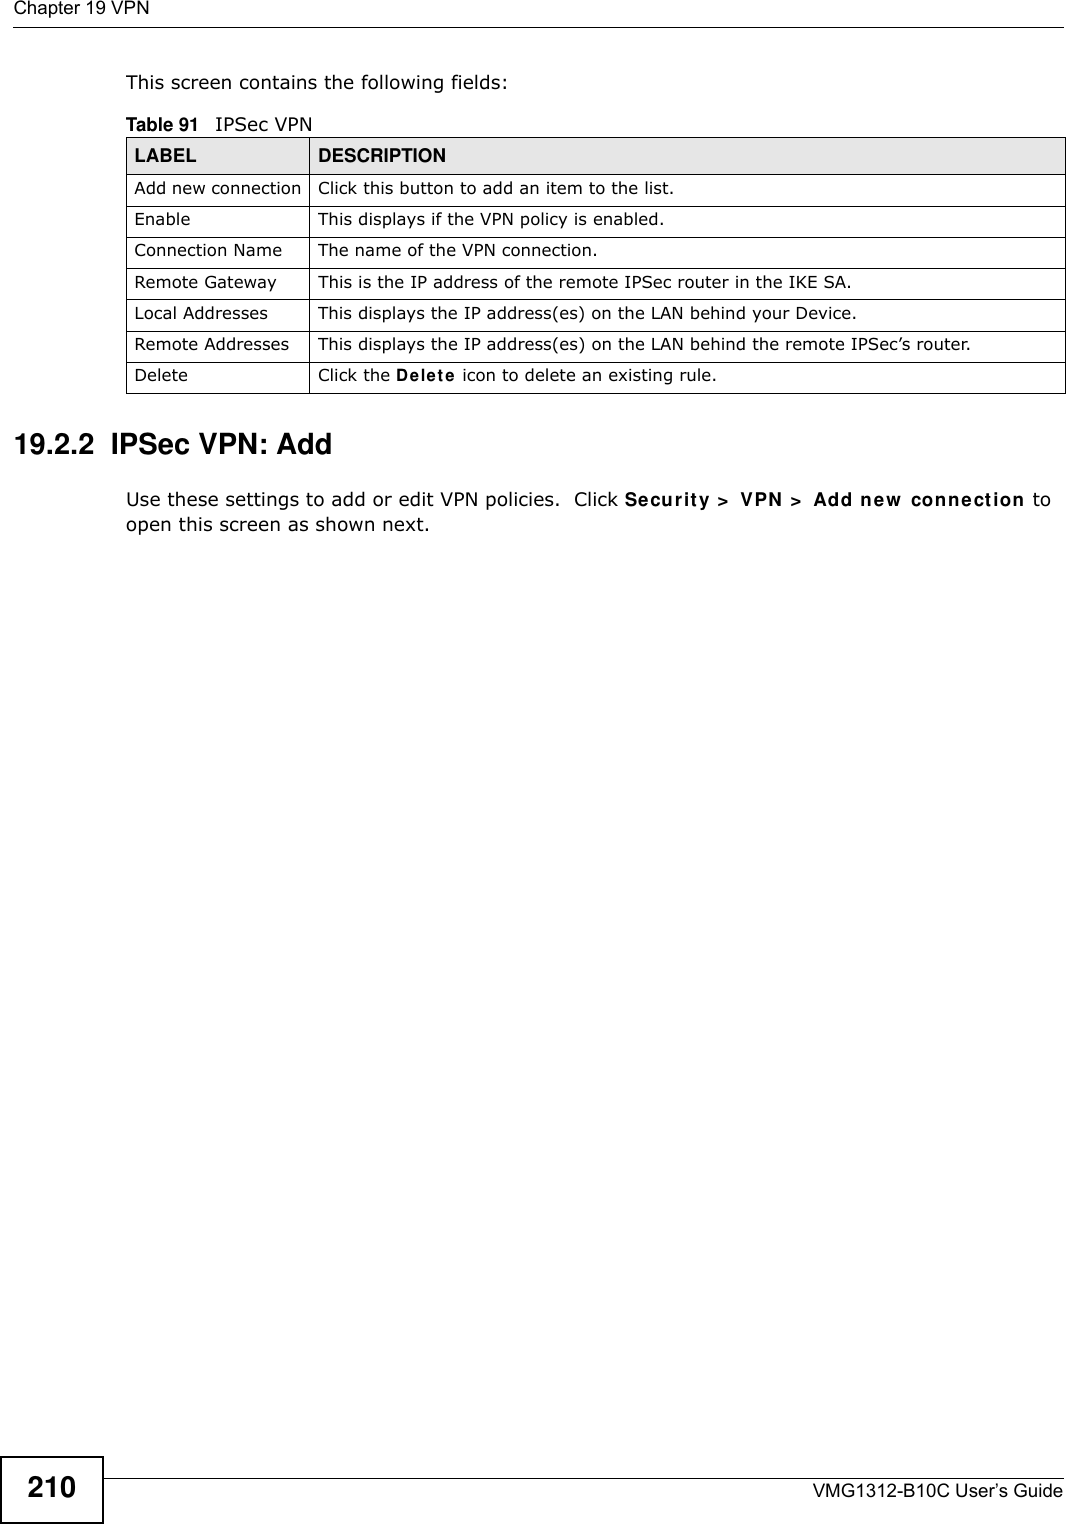 Chapter 19 VPNVMG1312-B10C User’s Guide210This screen contains the following fields:19.2.2  IPSec VPN: AddUse these settings to add or edit VPN policies.  Click Secur it y &gt;  VPN  &gt;  Add n e w  conn e ction  to open this screen as shown next.Table 91   IPSec VPNLABEL DESCRIPTIONAdd new connection Click this button to add an item to the list.Enable This displays if the VPN policy is enabled.Connection Name The name of the VPN connection.Remote Gateway This is the IP address of the remote IPSec router in the IKE SA.Local Addresses This displays the IP address(es) on the LAN behind your Device.Remote Addresses This displays the IP address(es) on the LAN behind the remote IPSec’s router.Delete Click the De le t e icon to delete an existing rule.